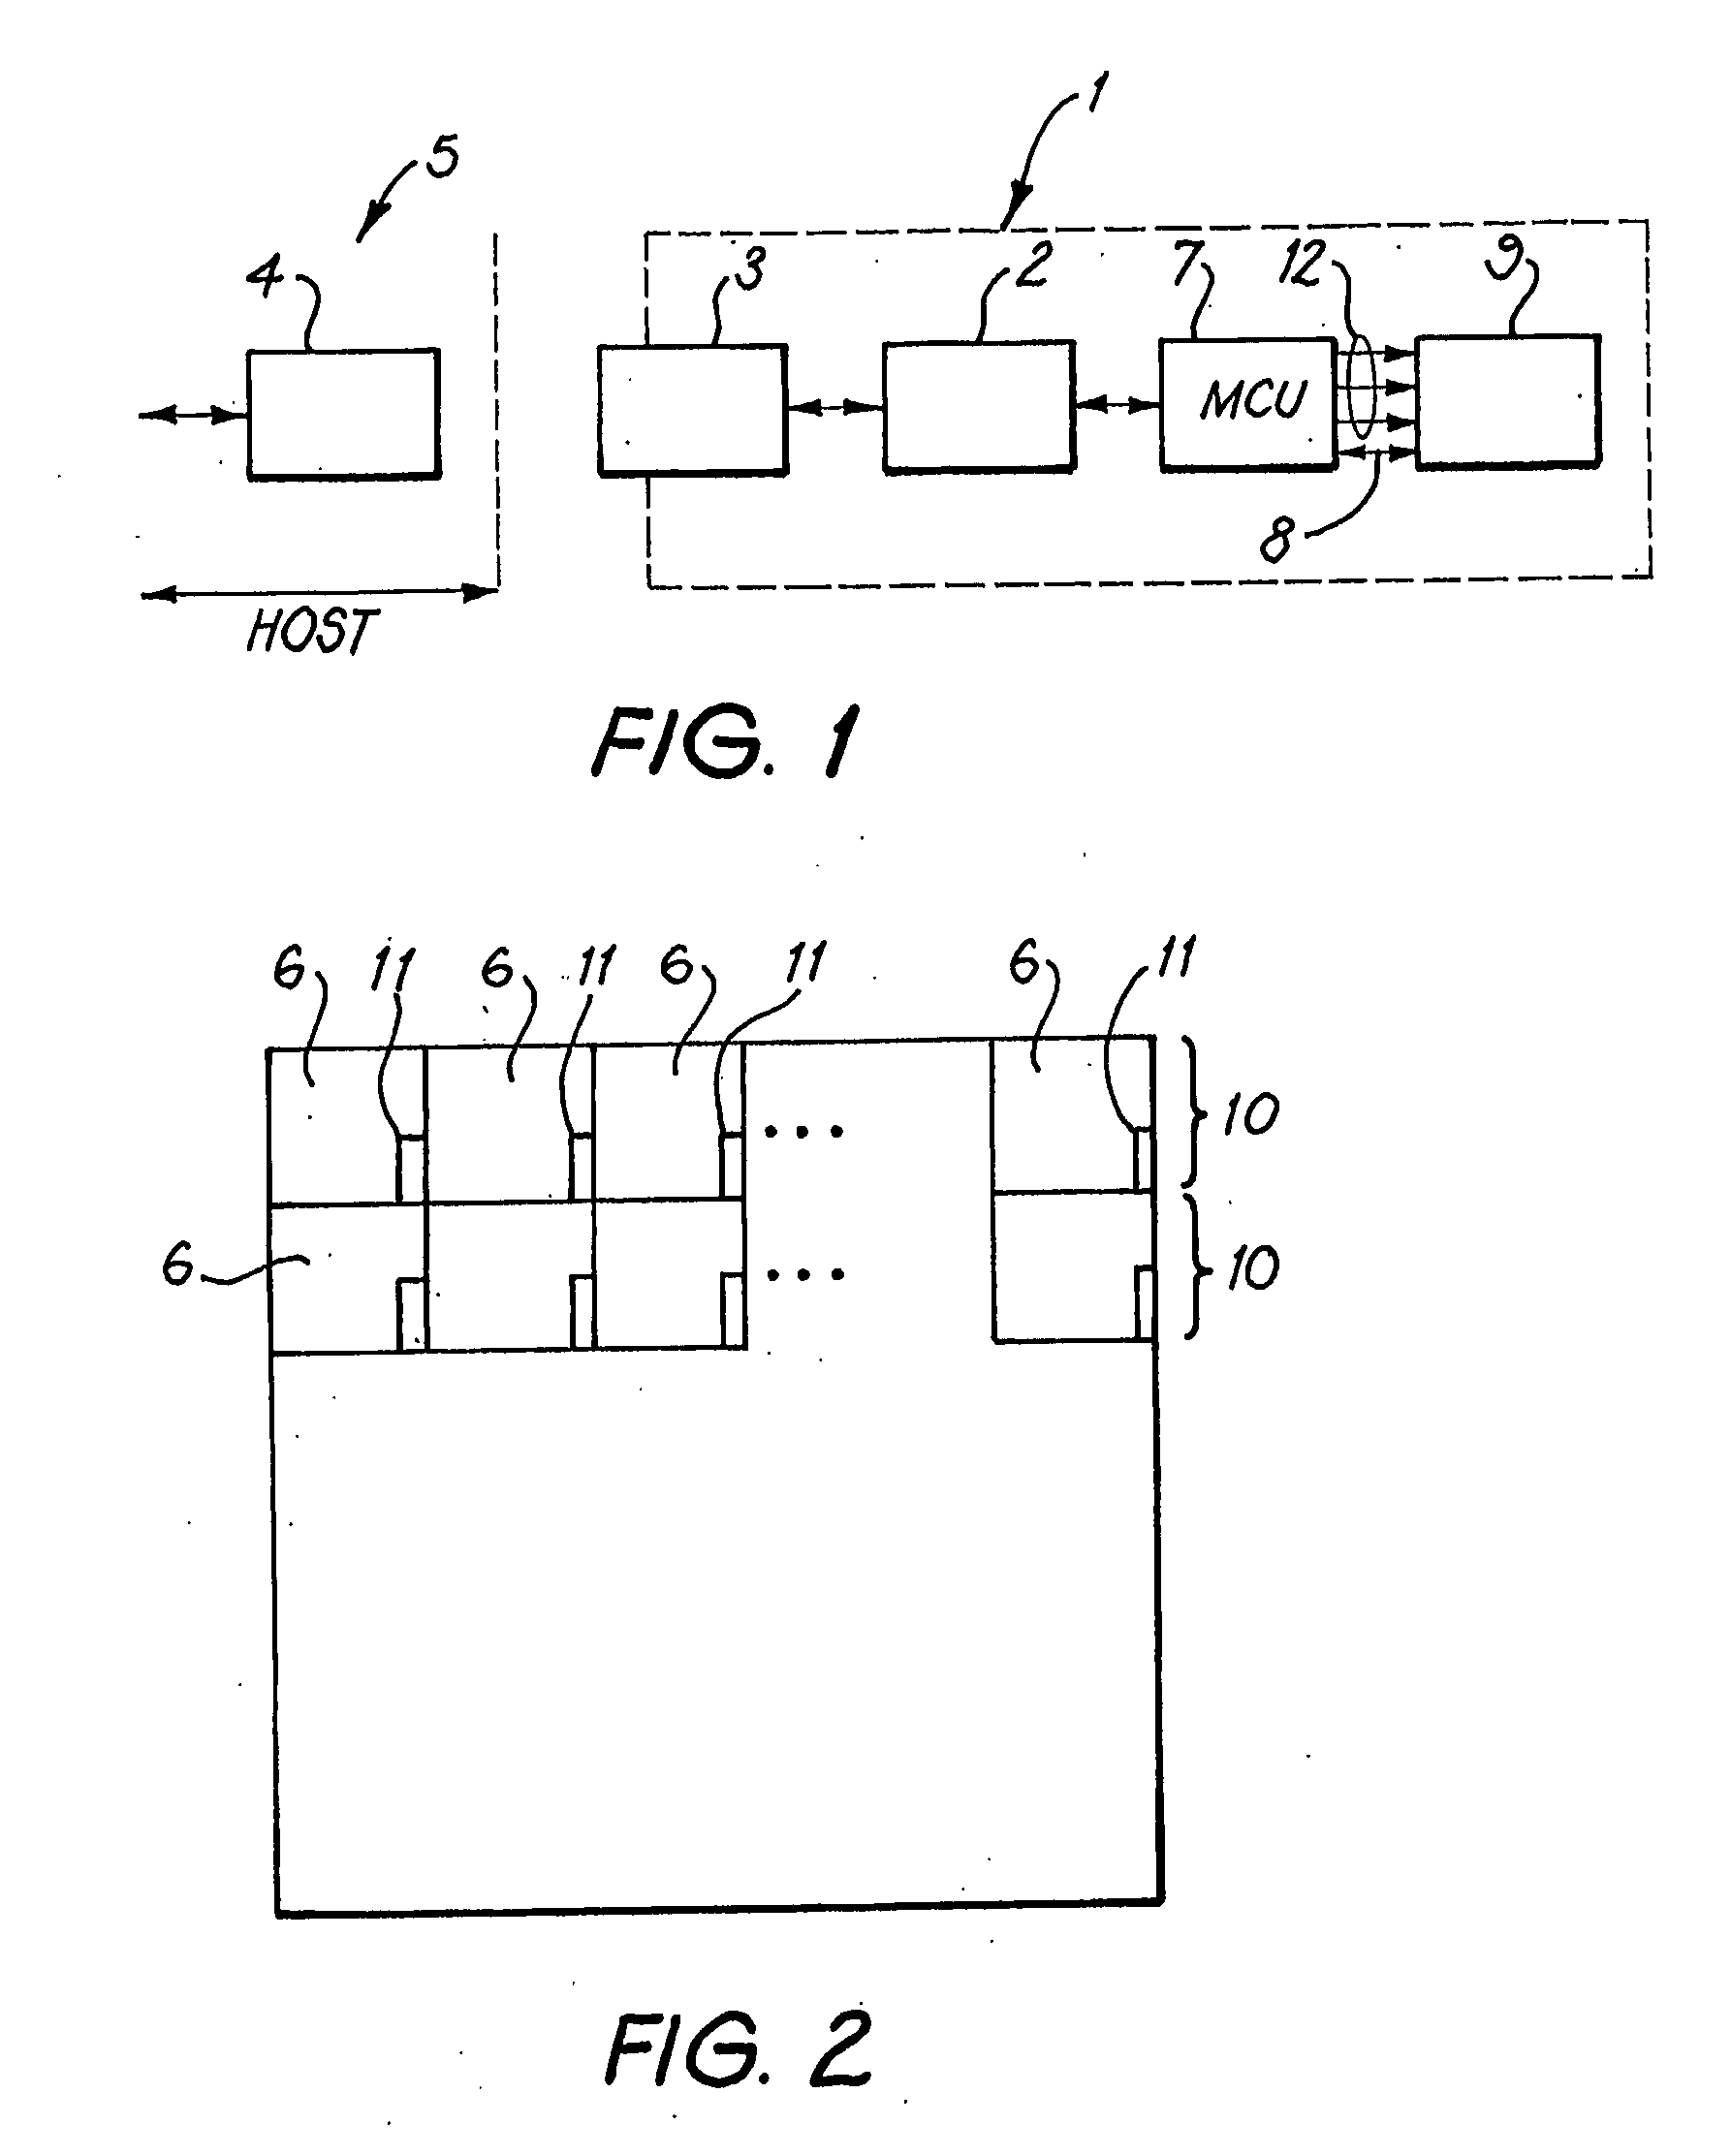 Portable Data Storage Device Using a Memory Address Mapping Table